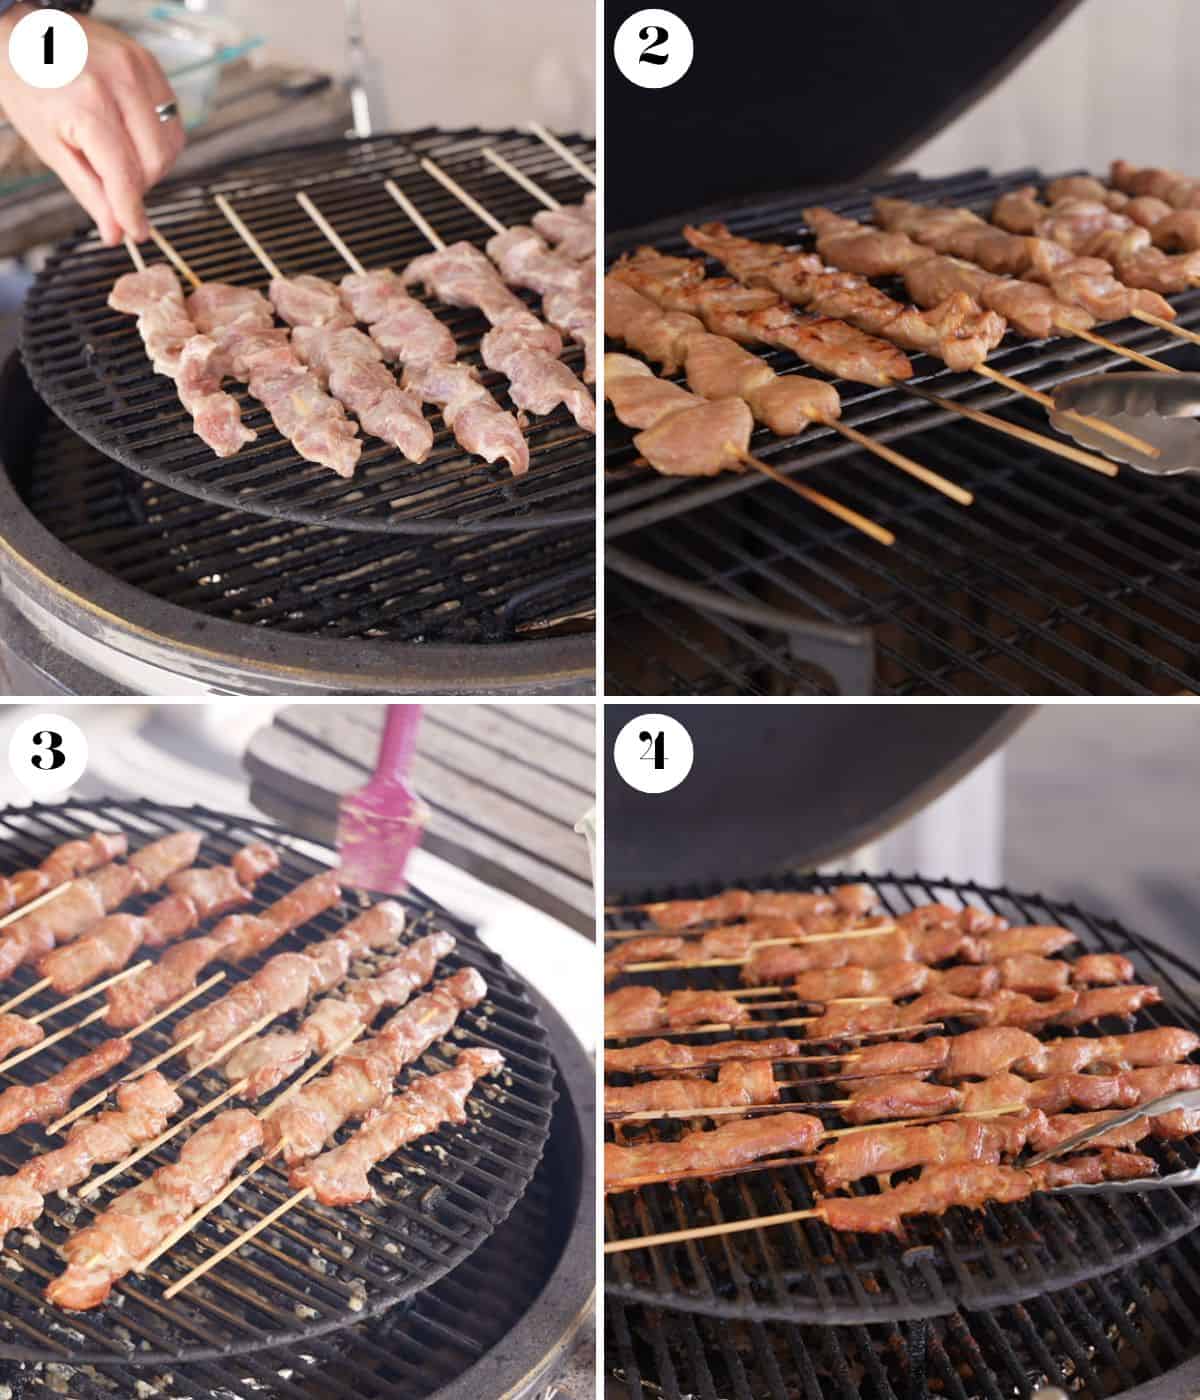 Four image collage showing skewers be placed on a grill, basting, and cooking.